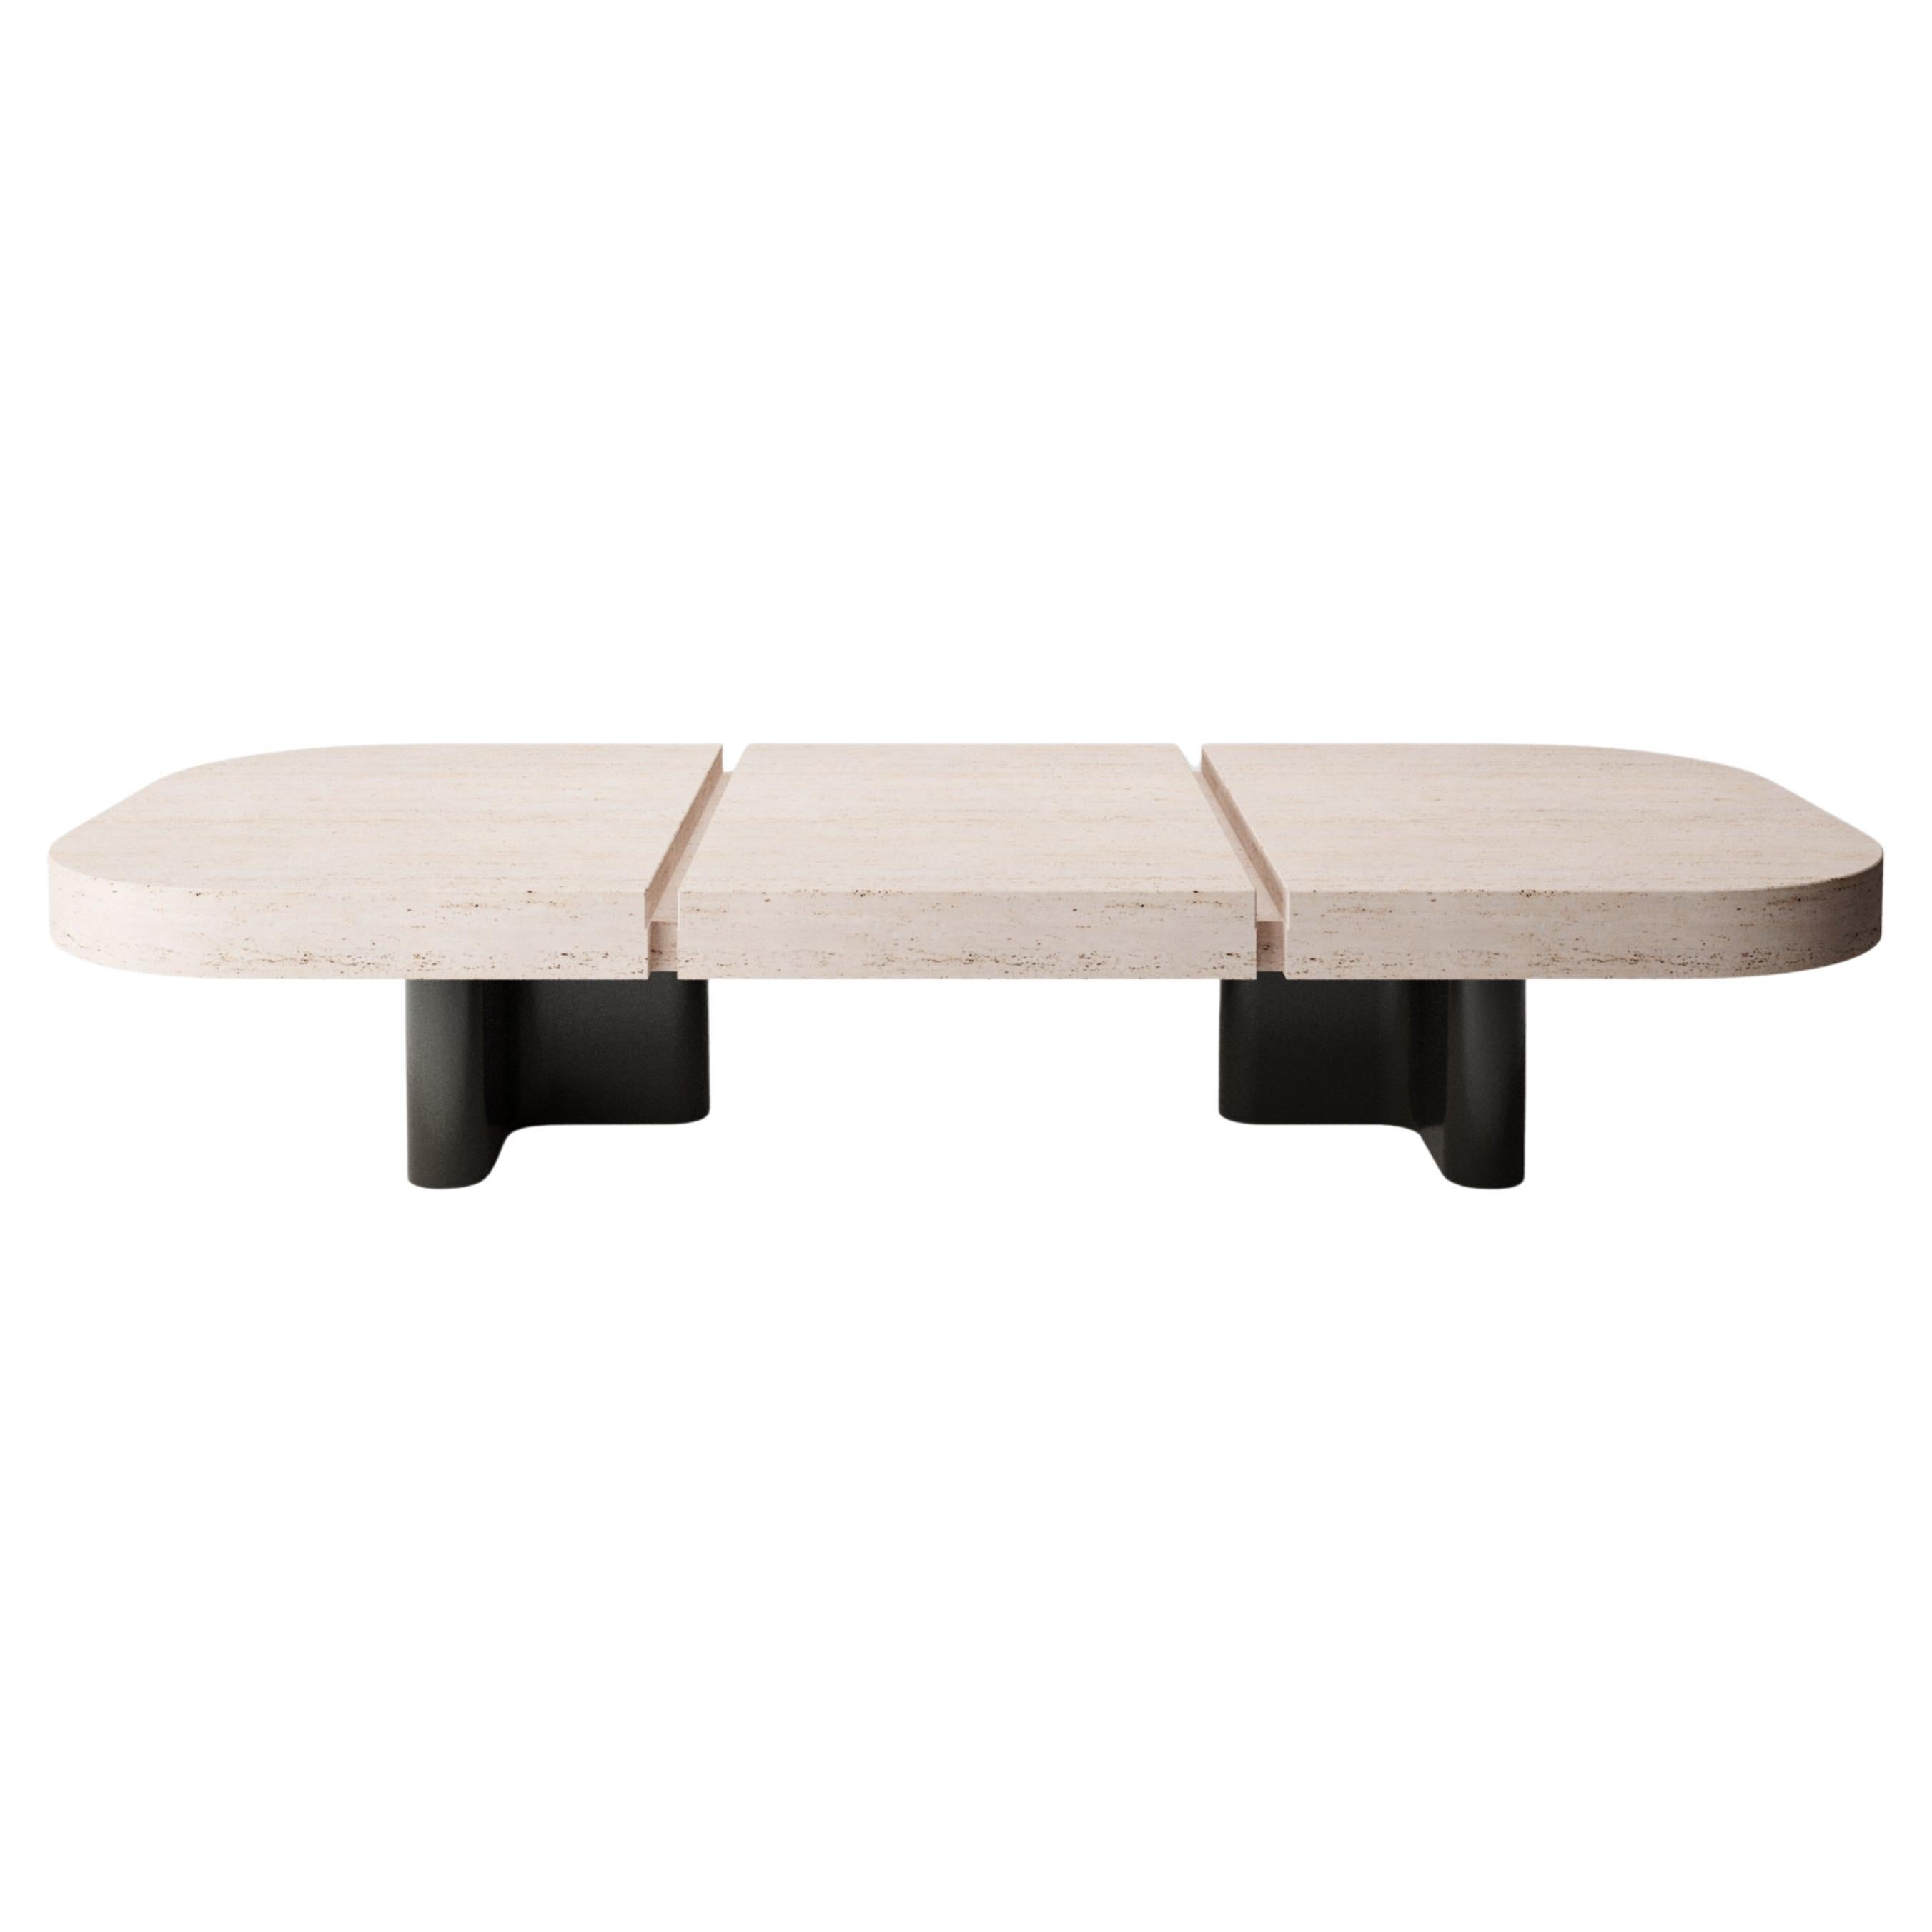 Collector -Designed by Studio Rig Meco Center Table Lacquered and Travertino